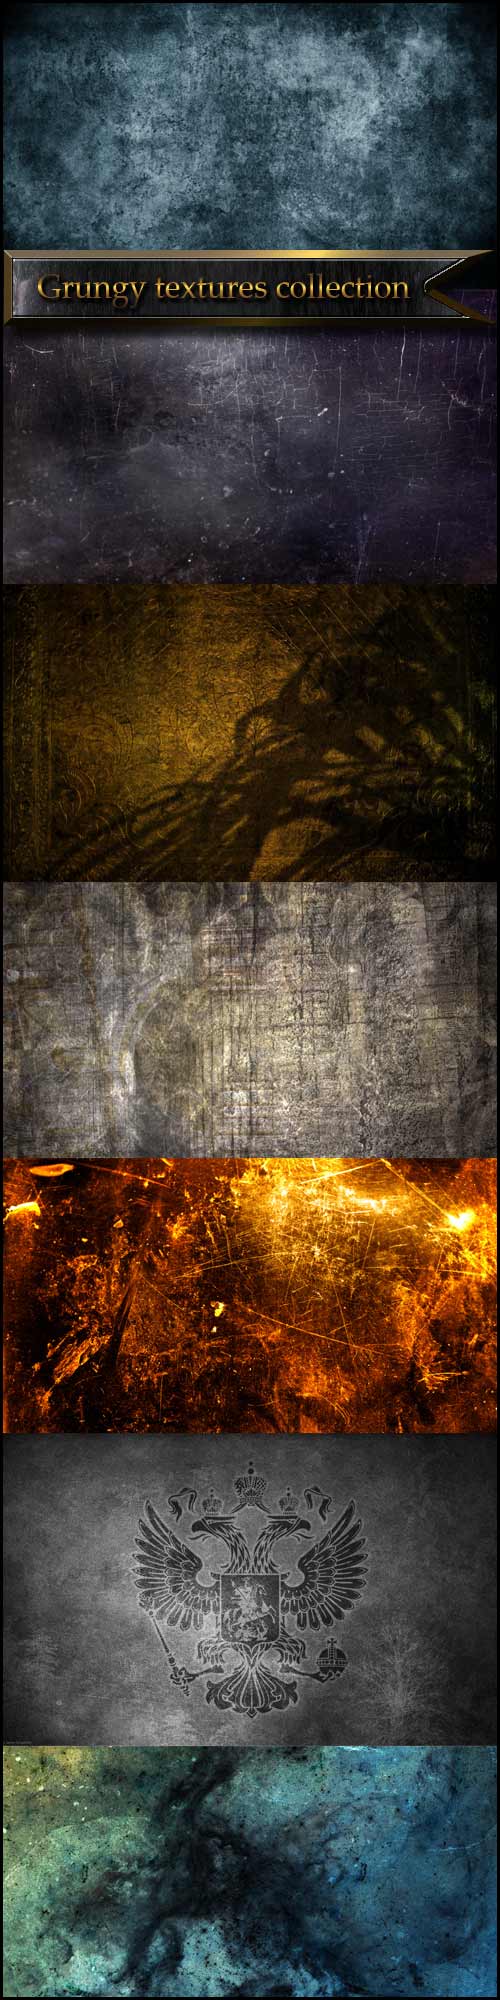 Grungy textures collection